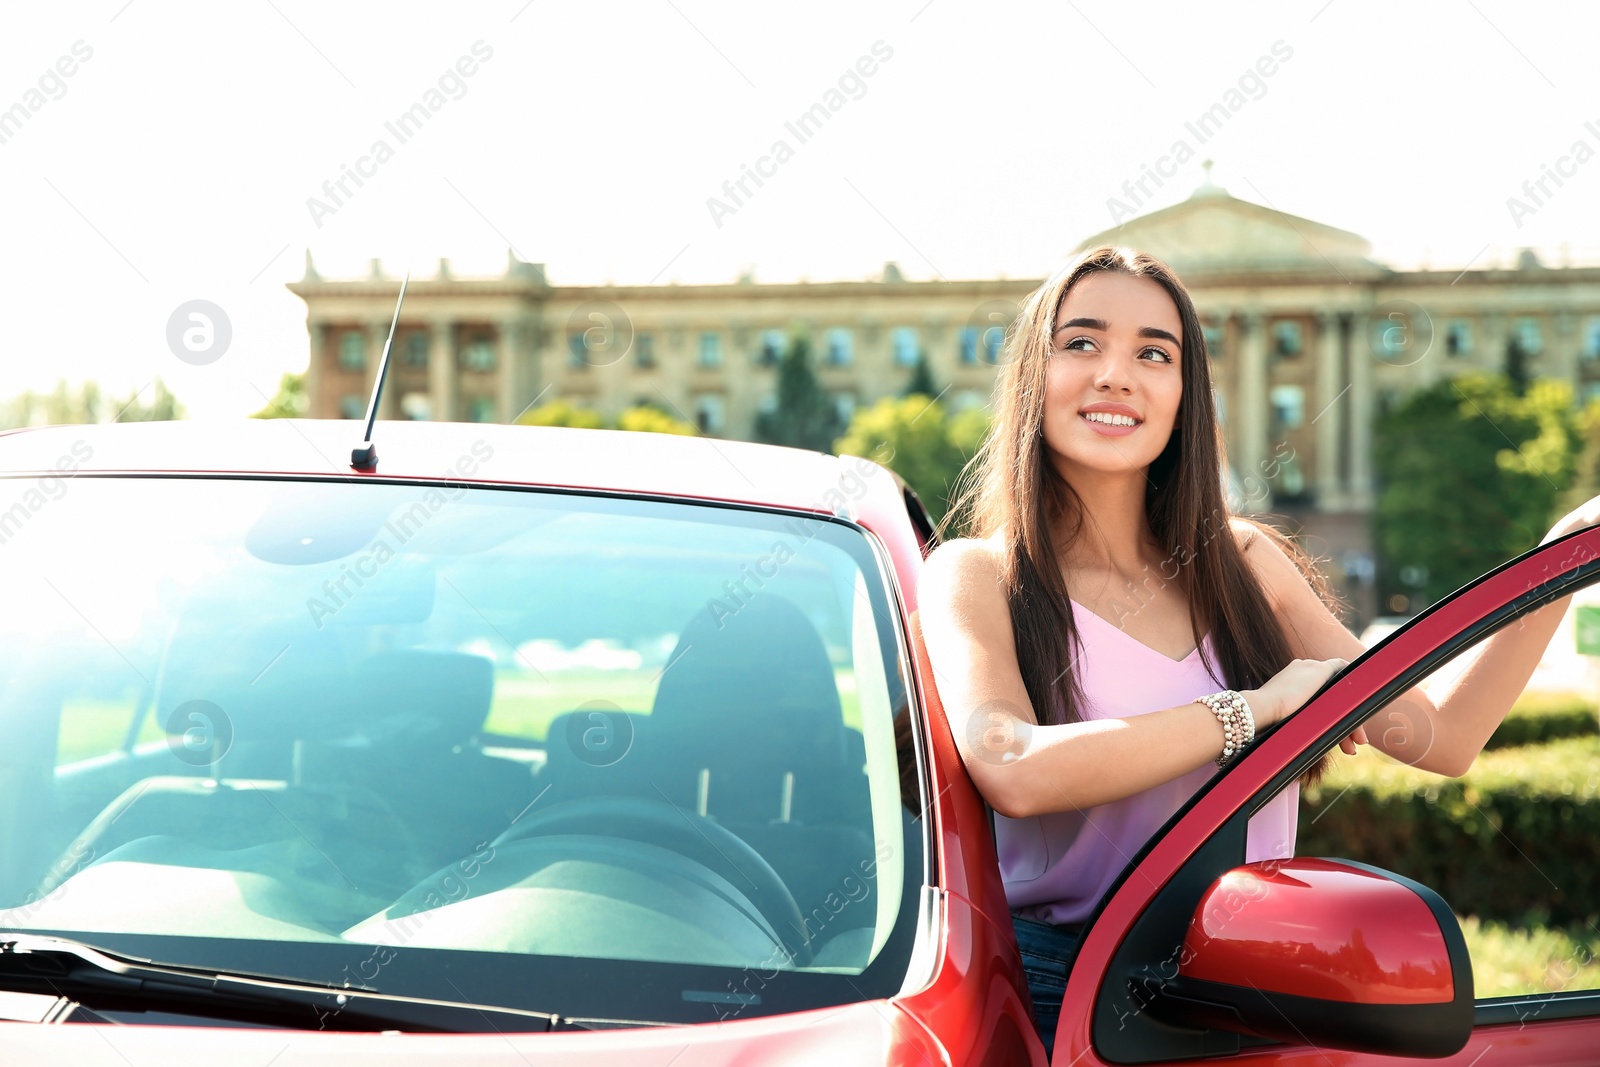 Photo of Young woman near car outdoors on sunny day